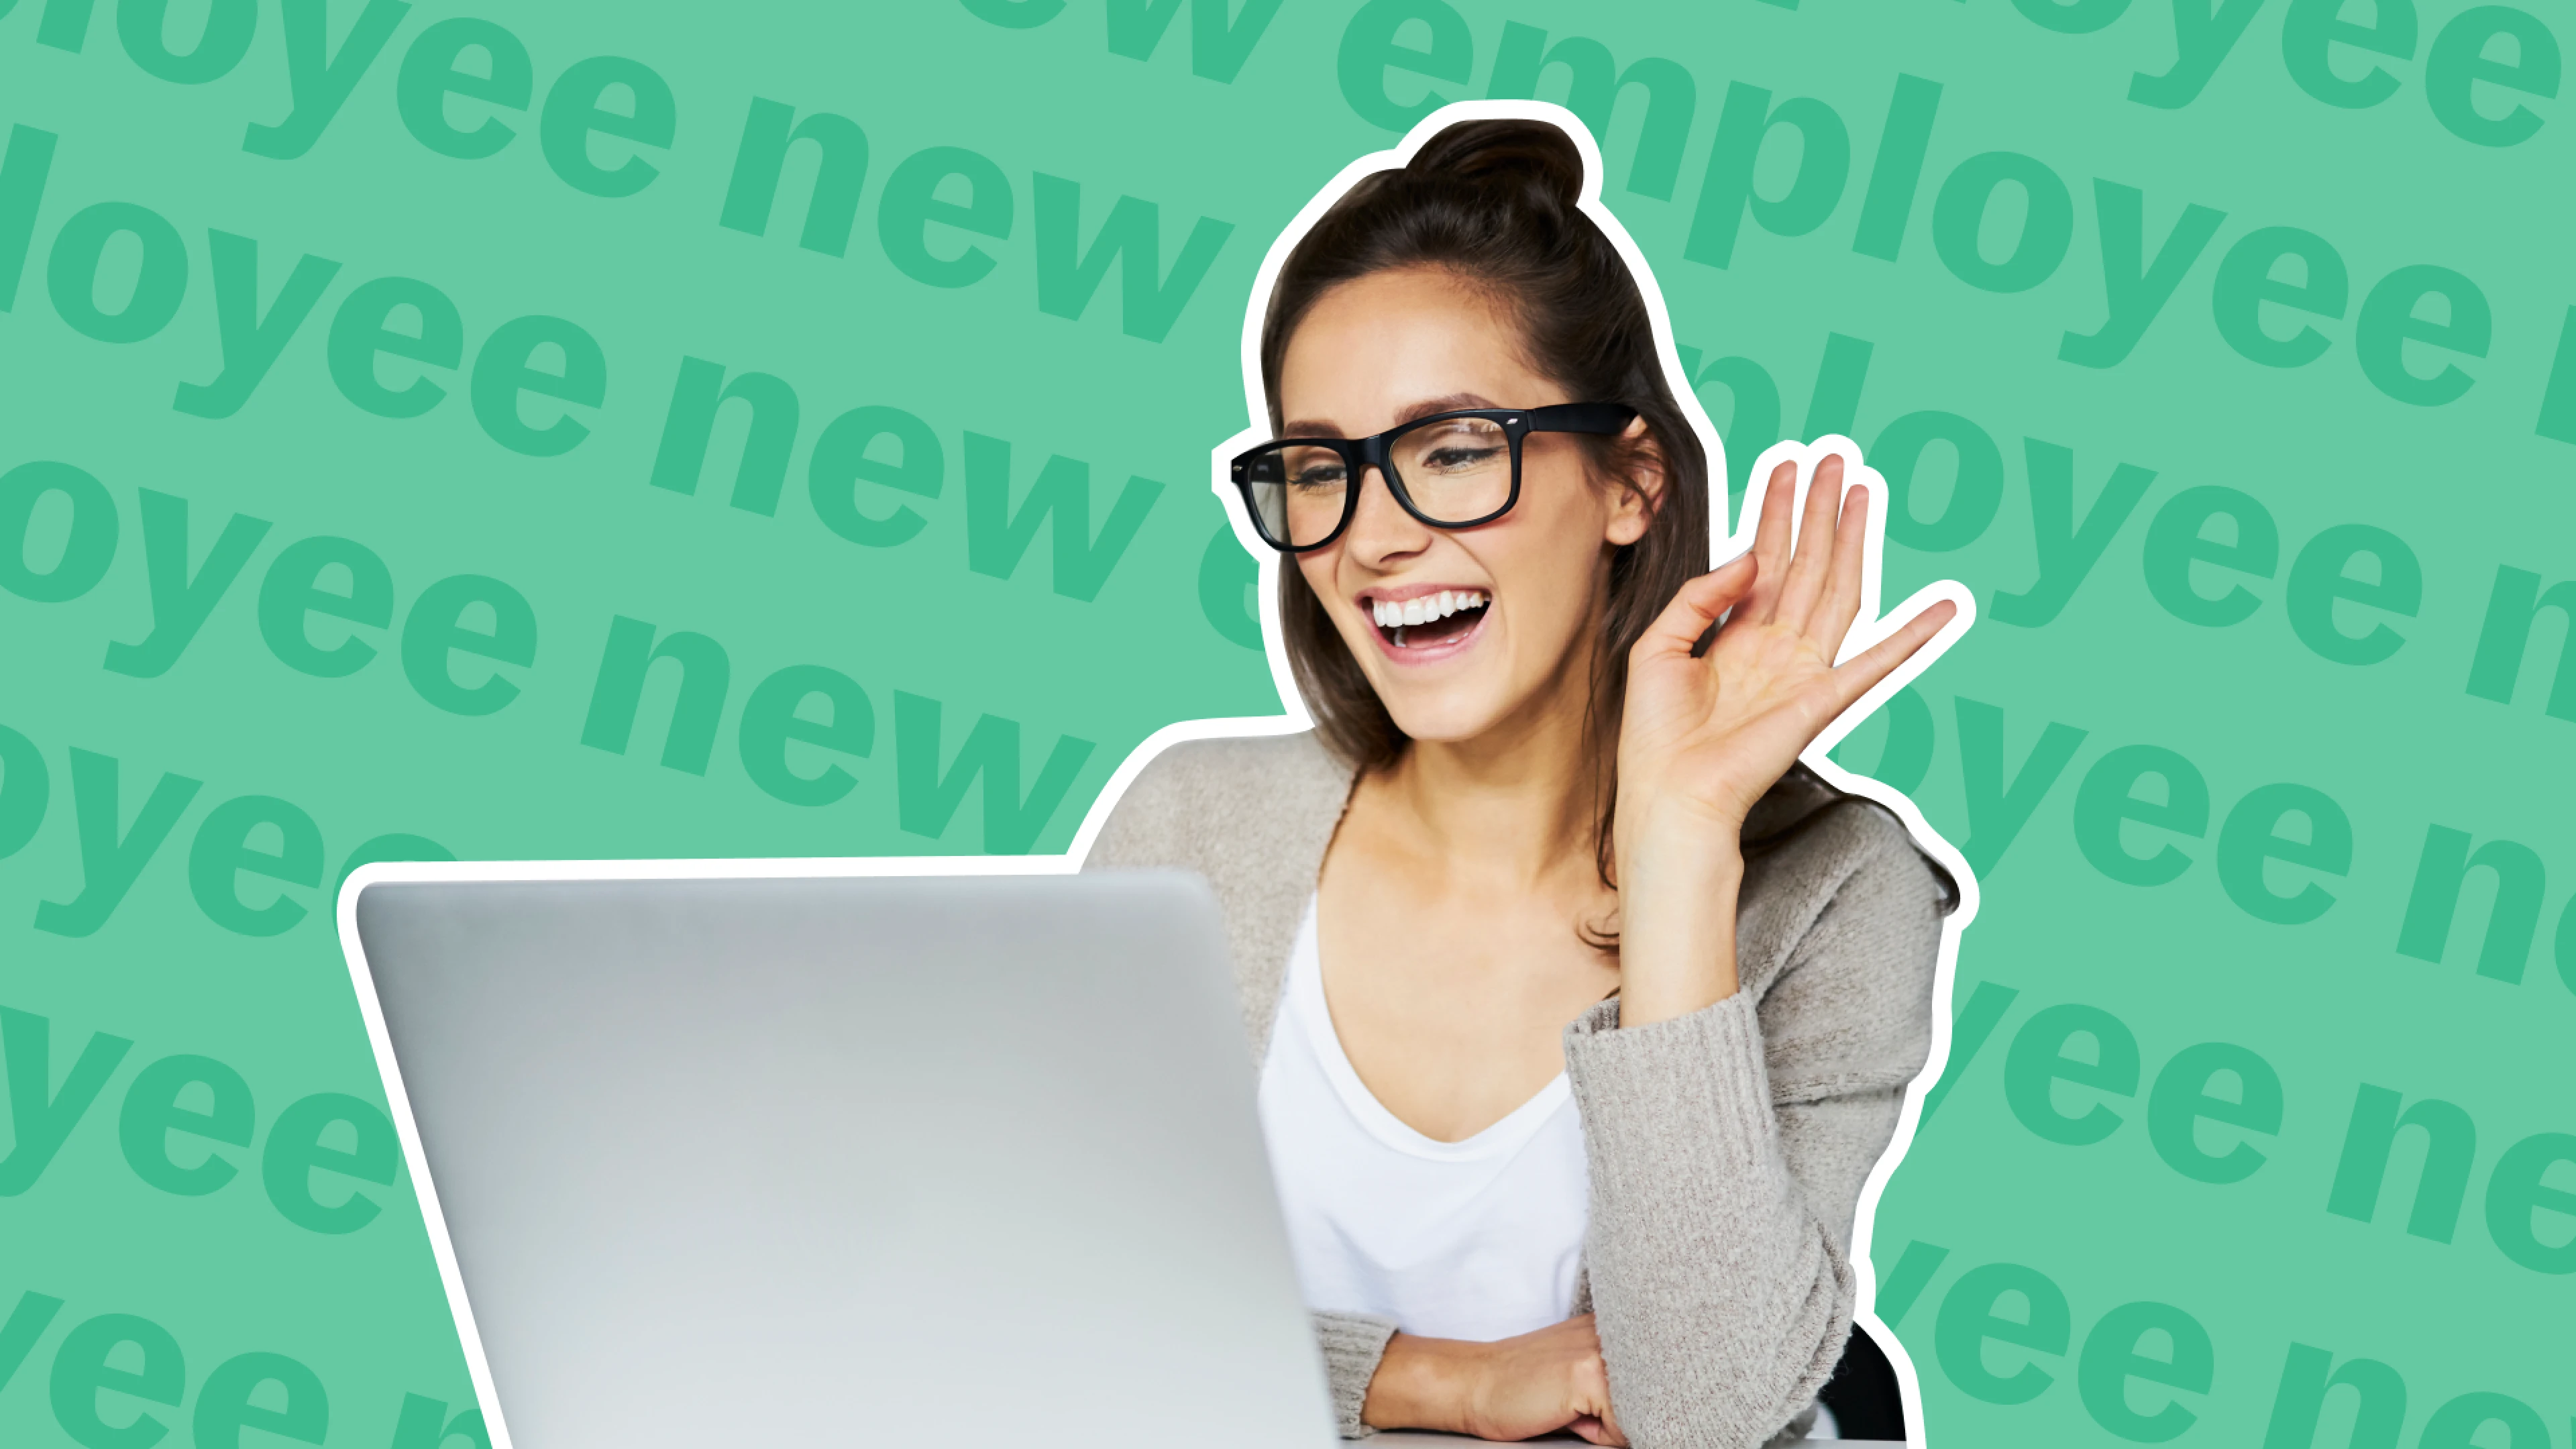 Blog - Hero - How to Welcome a New Employee